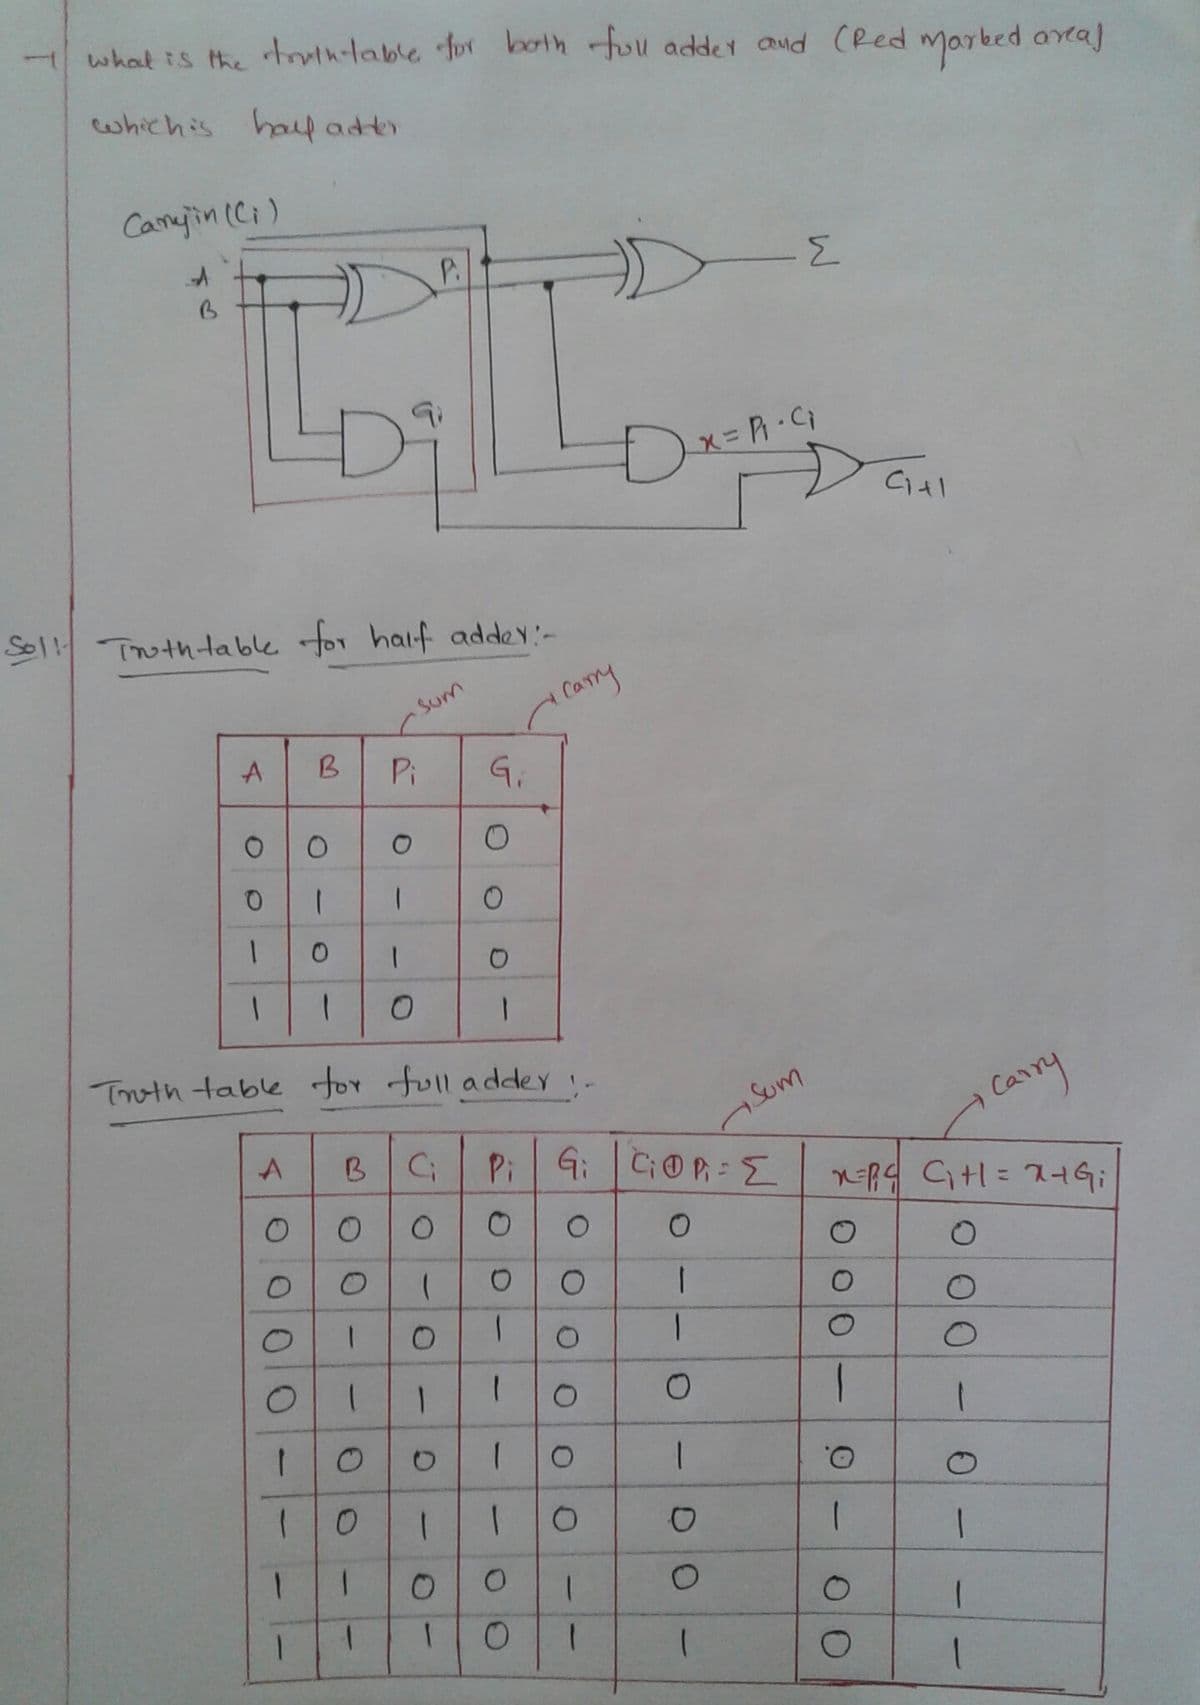 1what is the truln-lable for both fou adder aud (Red marbed ancal
whichis hay adtr
Camyin (Ci)
P.
Soll Truth table for haif adder:-
cary
Sum
A
B
Pi
G.
Truth table for full addey -
Sum
Pi Gi COP,
A
B
Ci
Carry
%3D
O.
